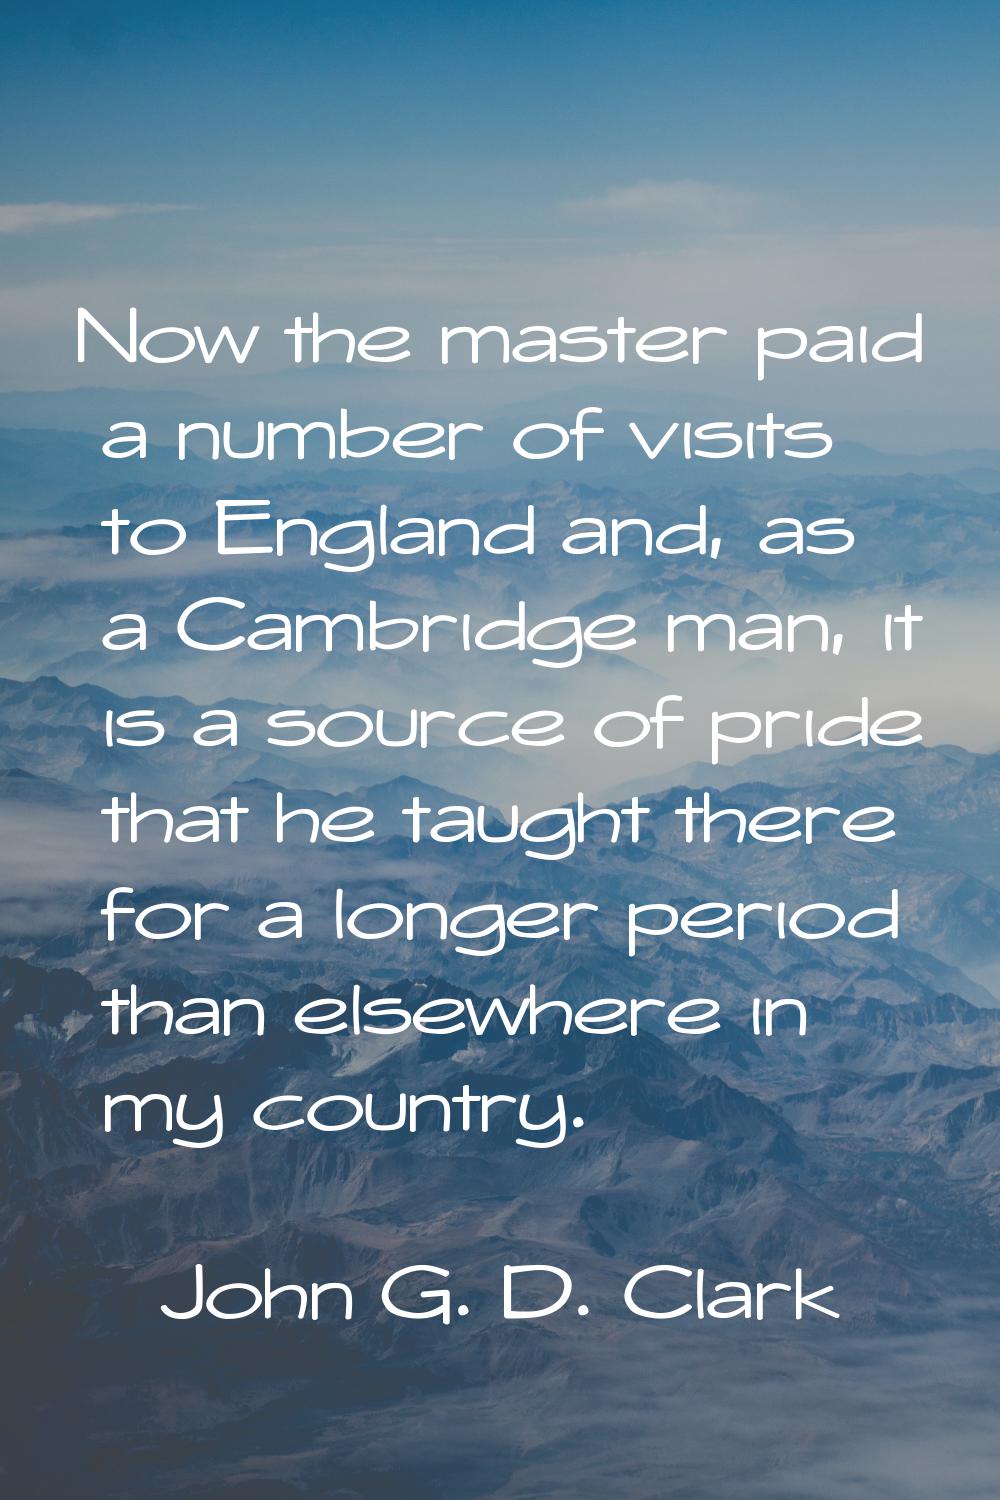 Now the master paid a number of visits to England and, as a Cambridge man, it is a source of pride 